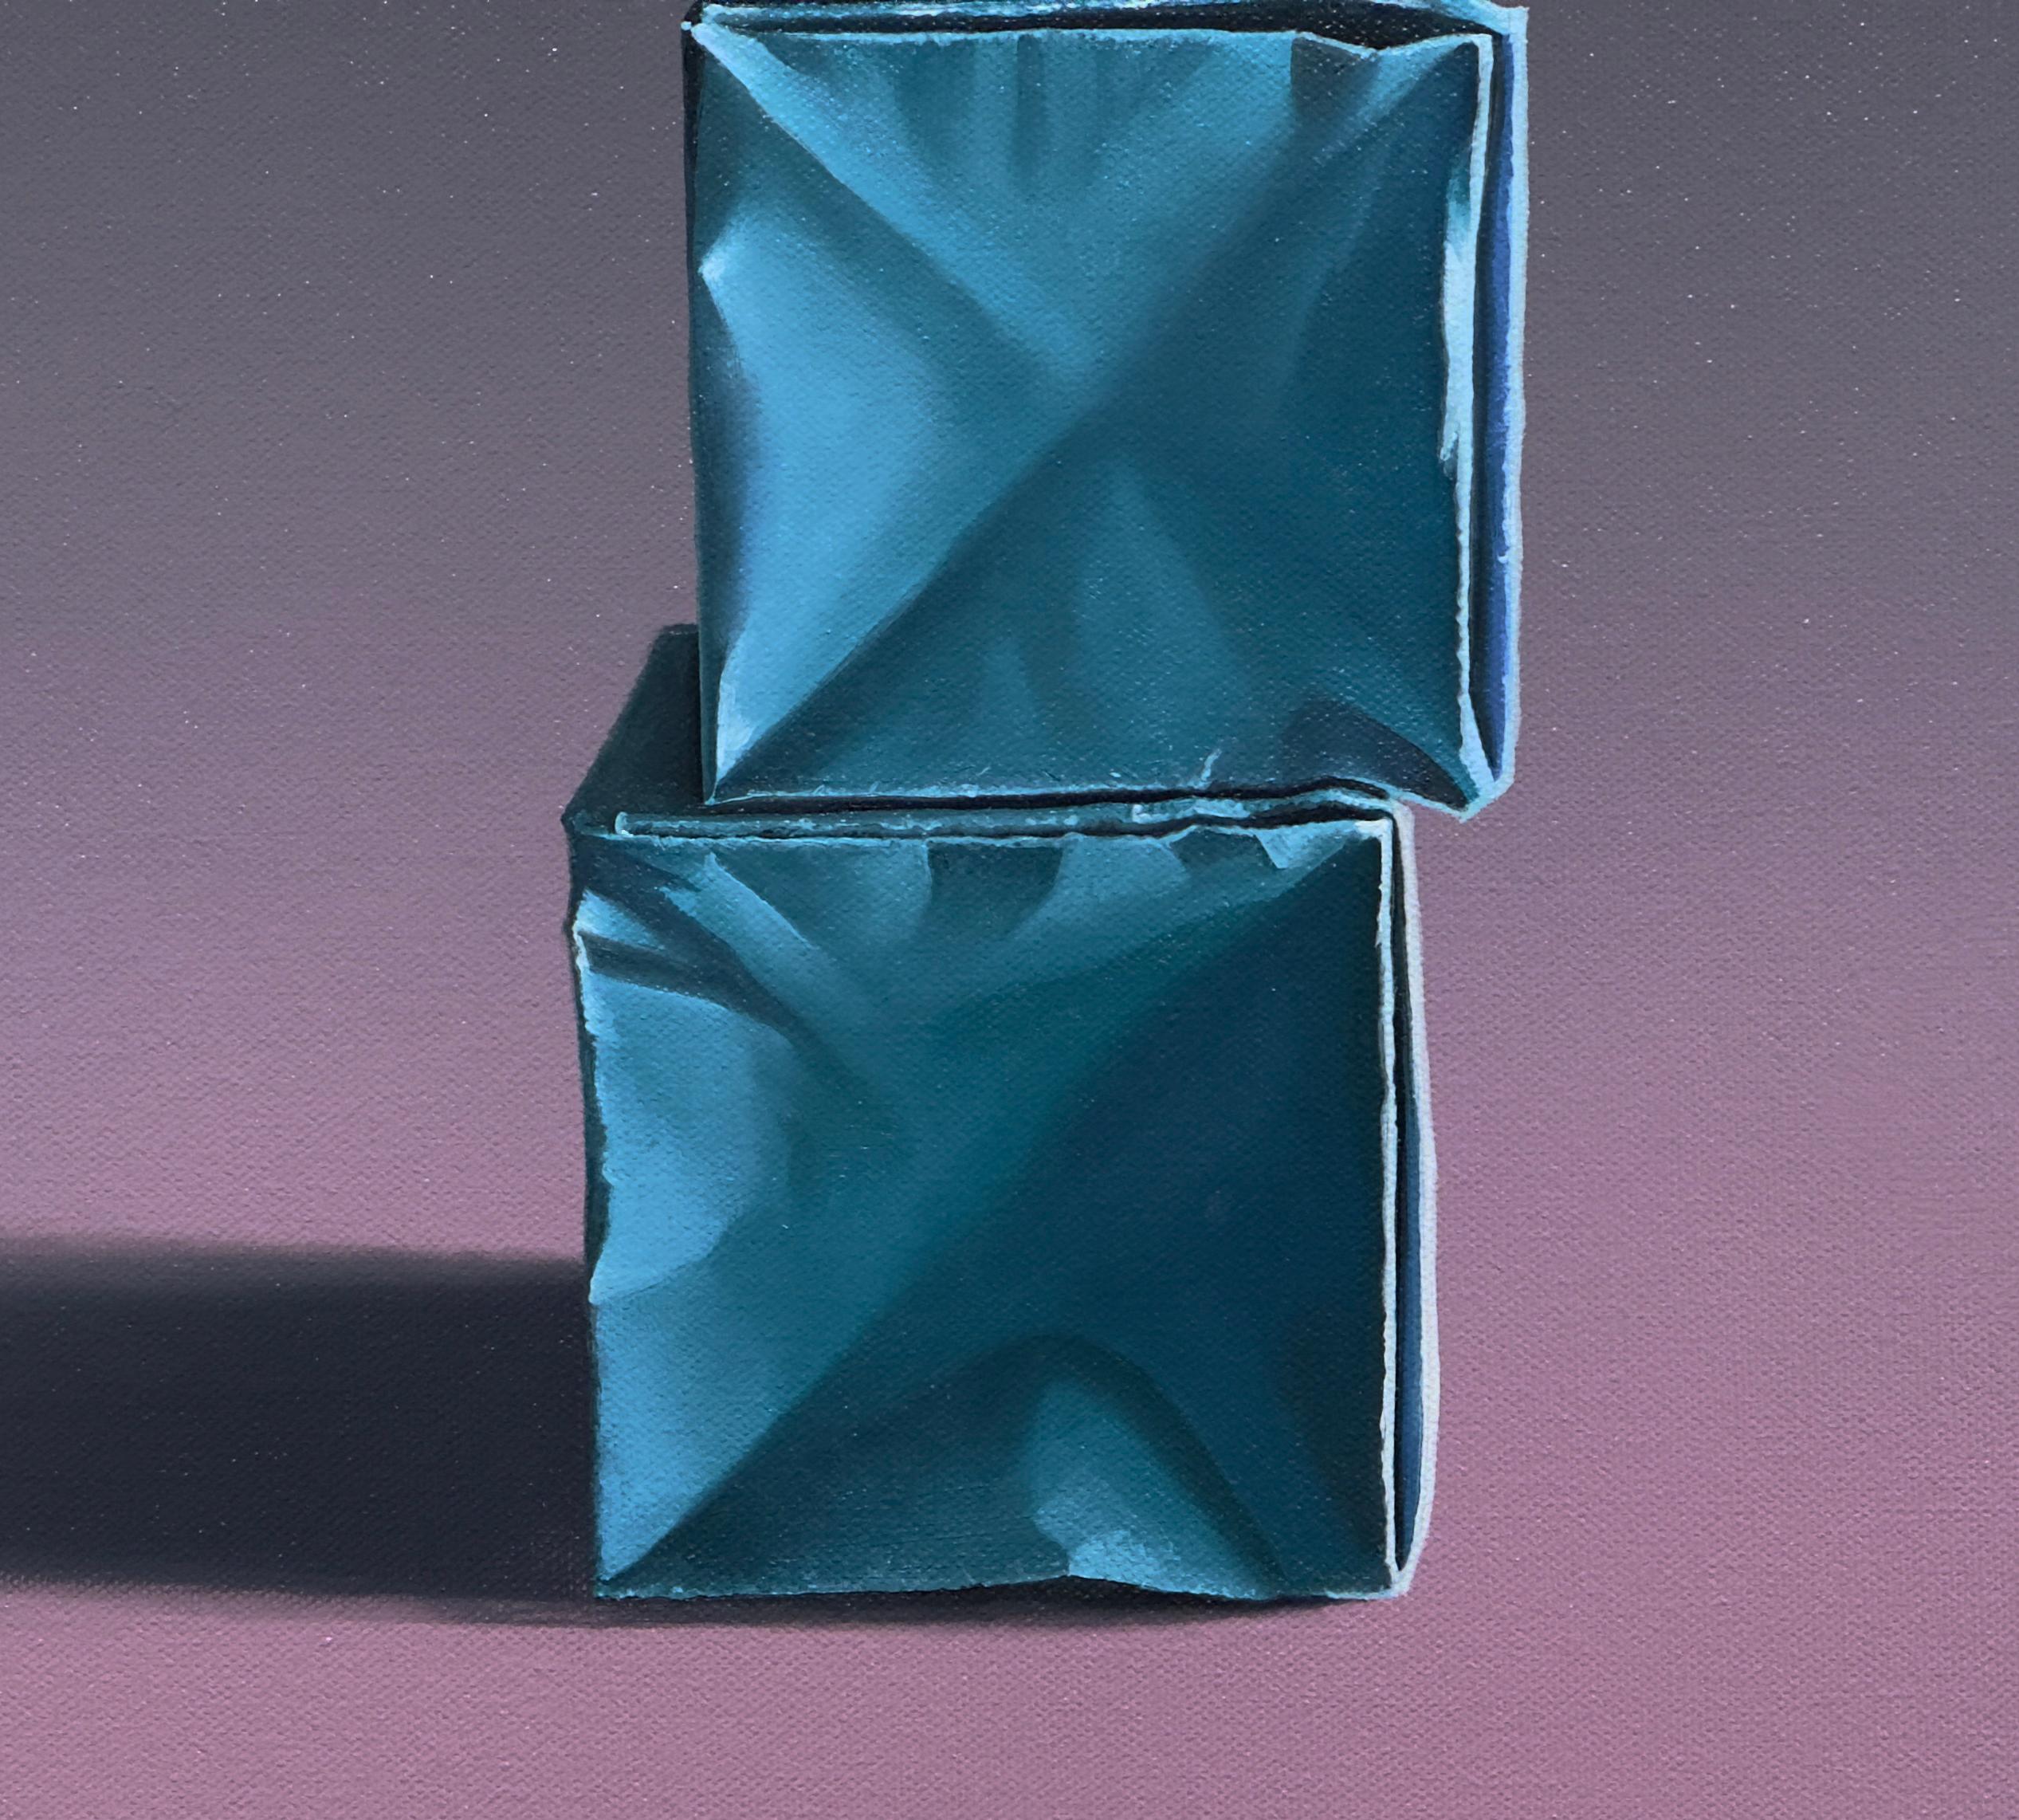 PAPER BOXES: COMPOSITION WITH A TEAL STACK ON PURPLE/GRAY GRADIENT For Sale 1